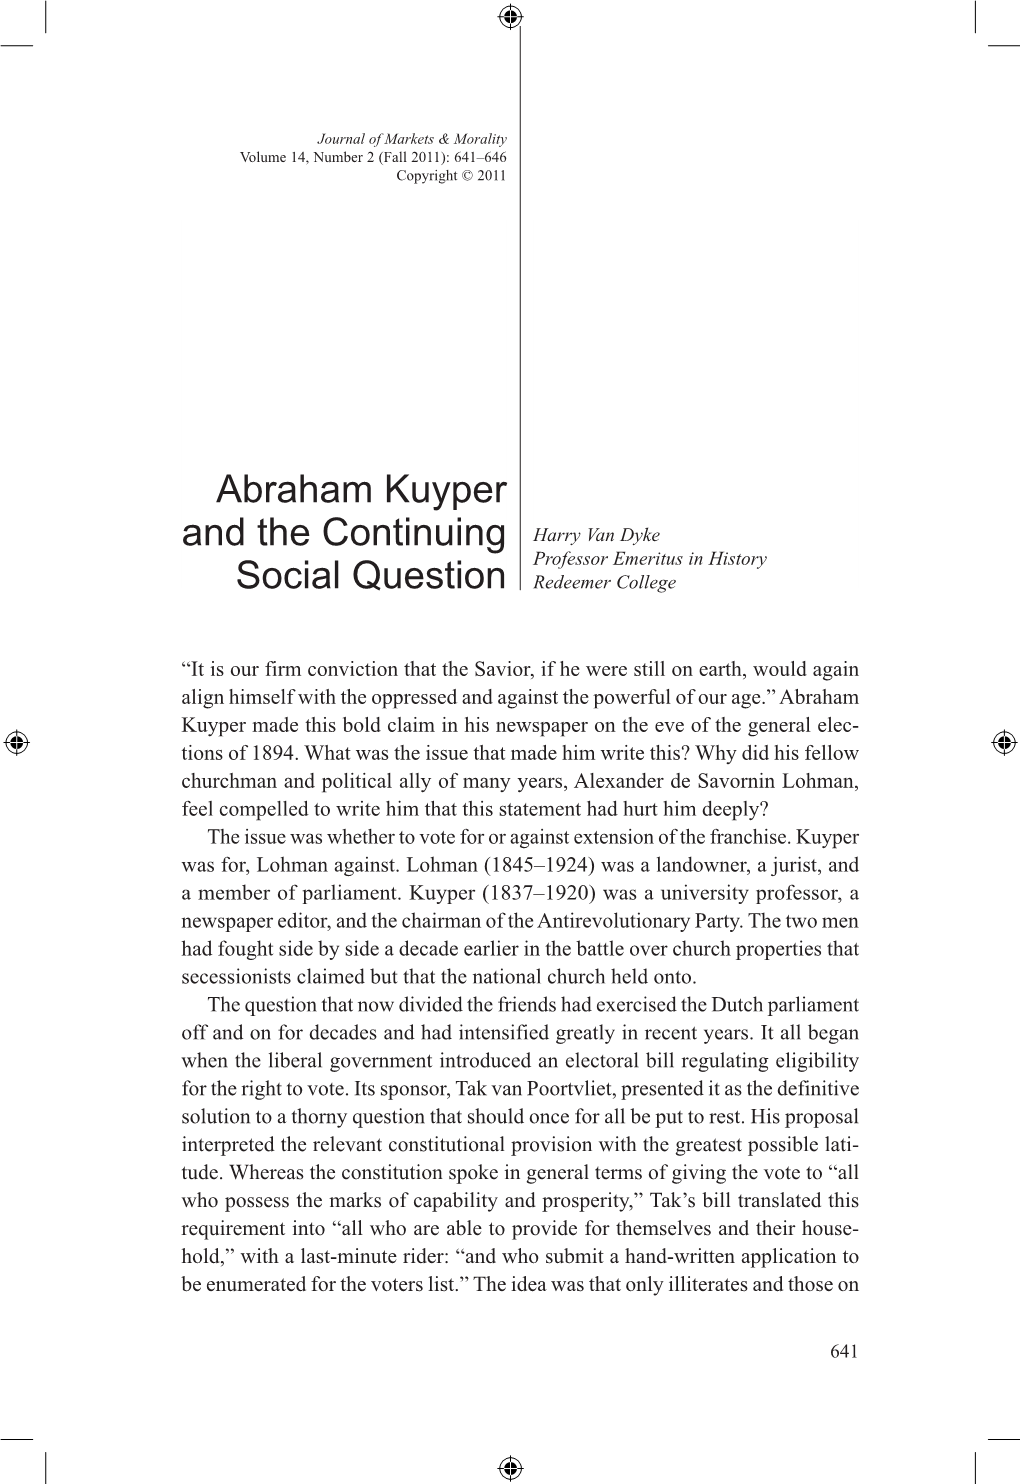 Abraham Kuyper and the Continuing Social Question